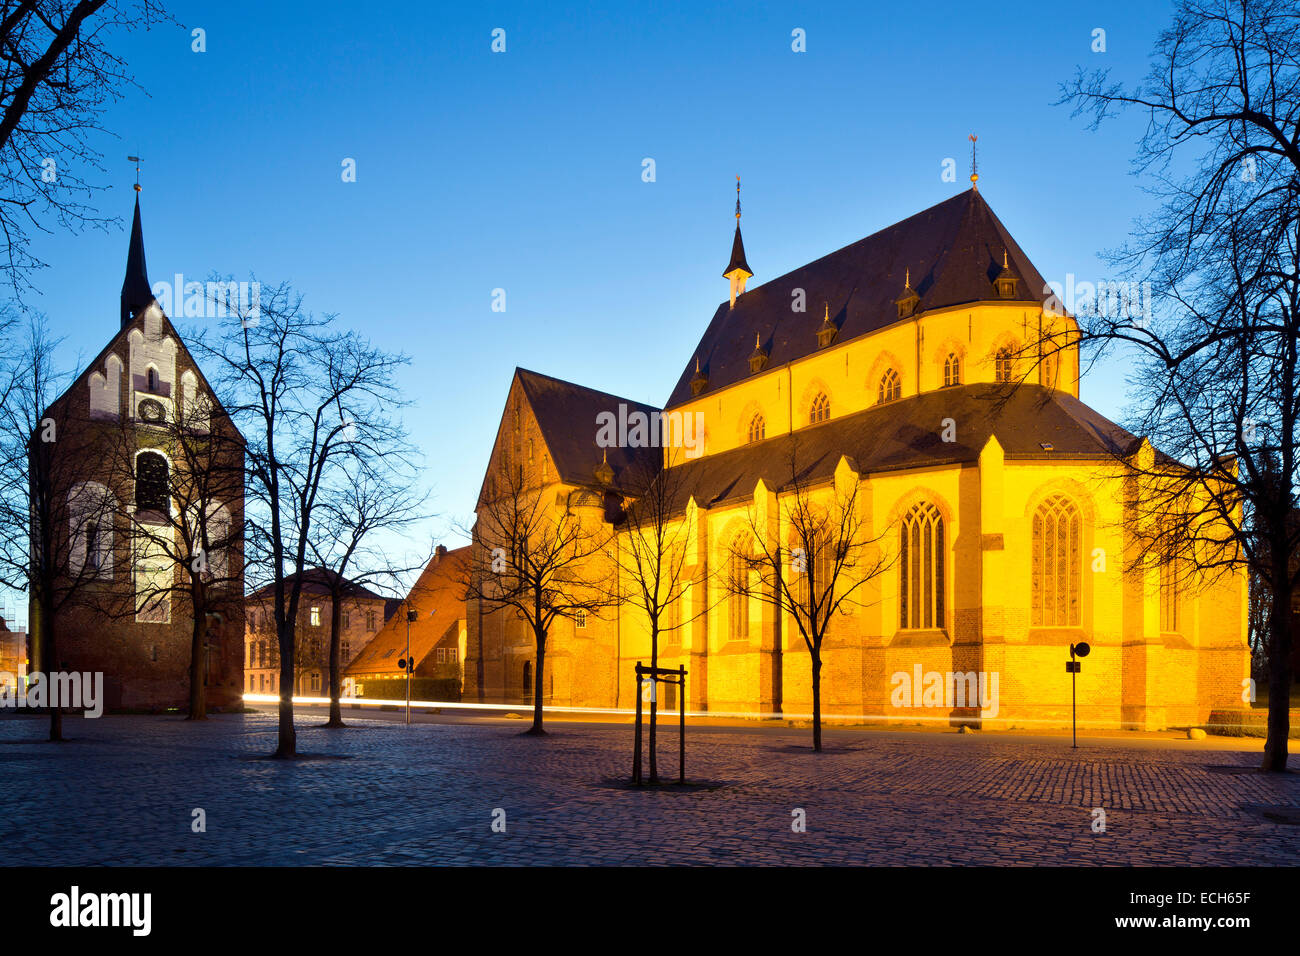 Romanesque Ludgerikirche church, 13th century with campanile, Norden, East Frisia, Lower Saxony, Germany Stock Photo